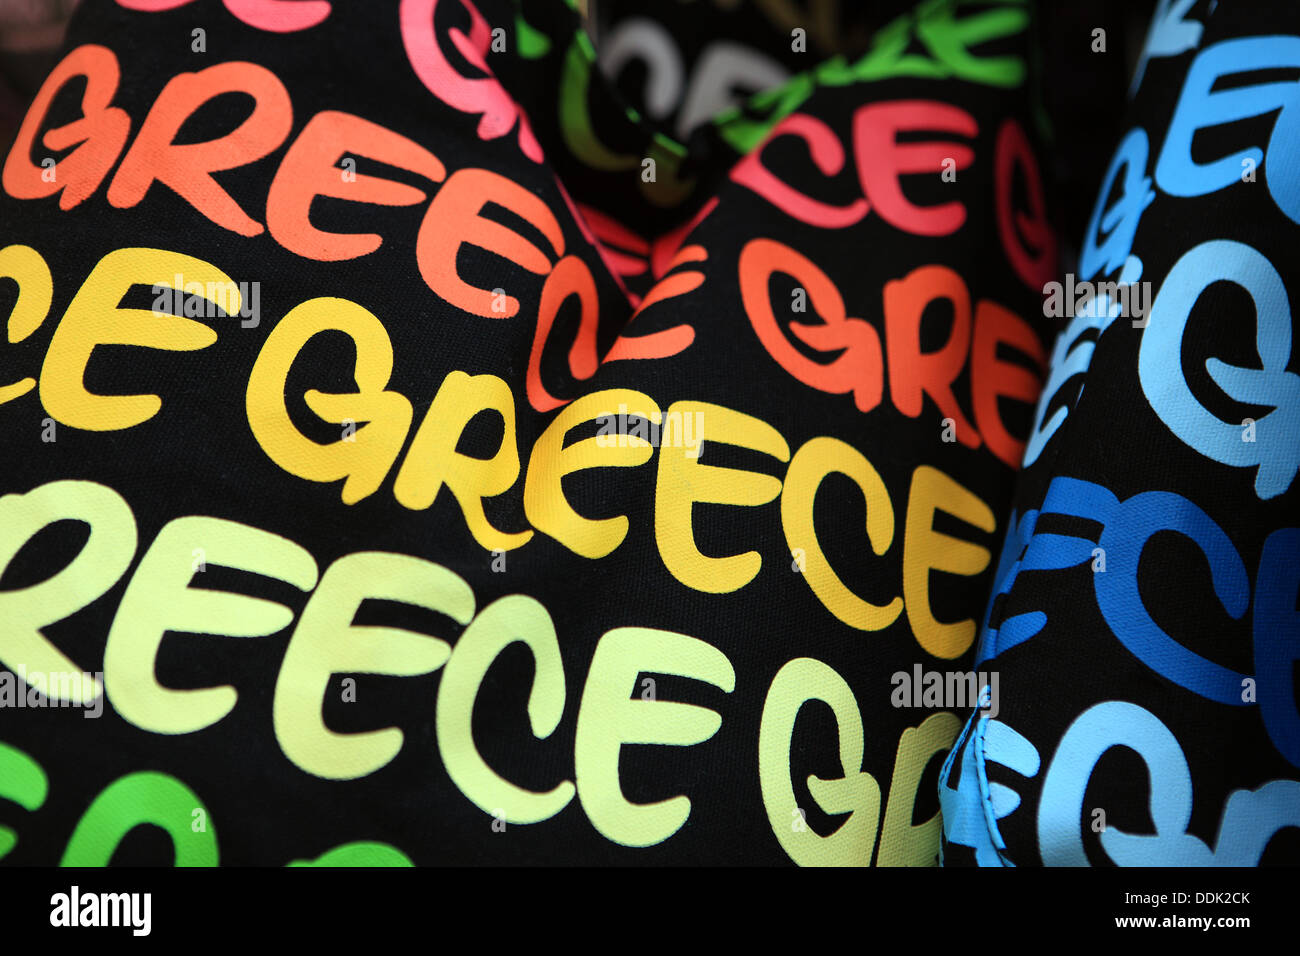 Greece in colourful words on a bag hanging up for sale Stock Photo